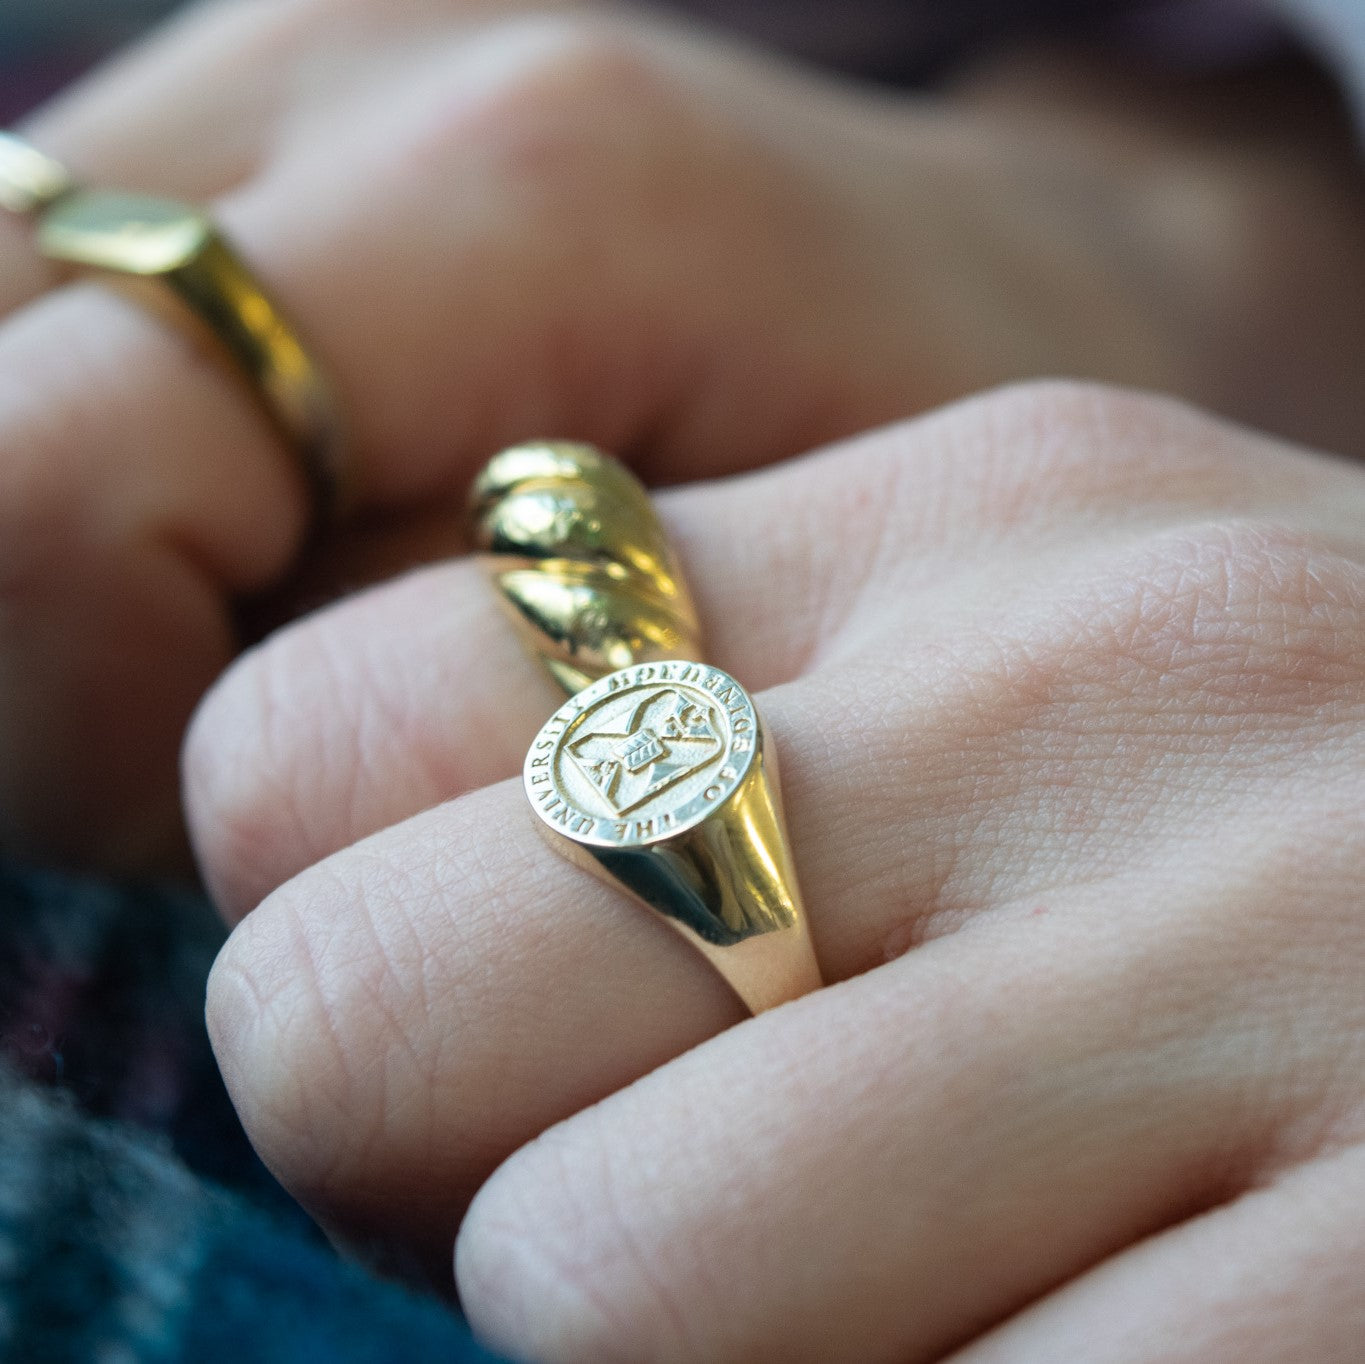 Gold signet ring on a hand